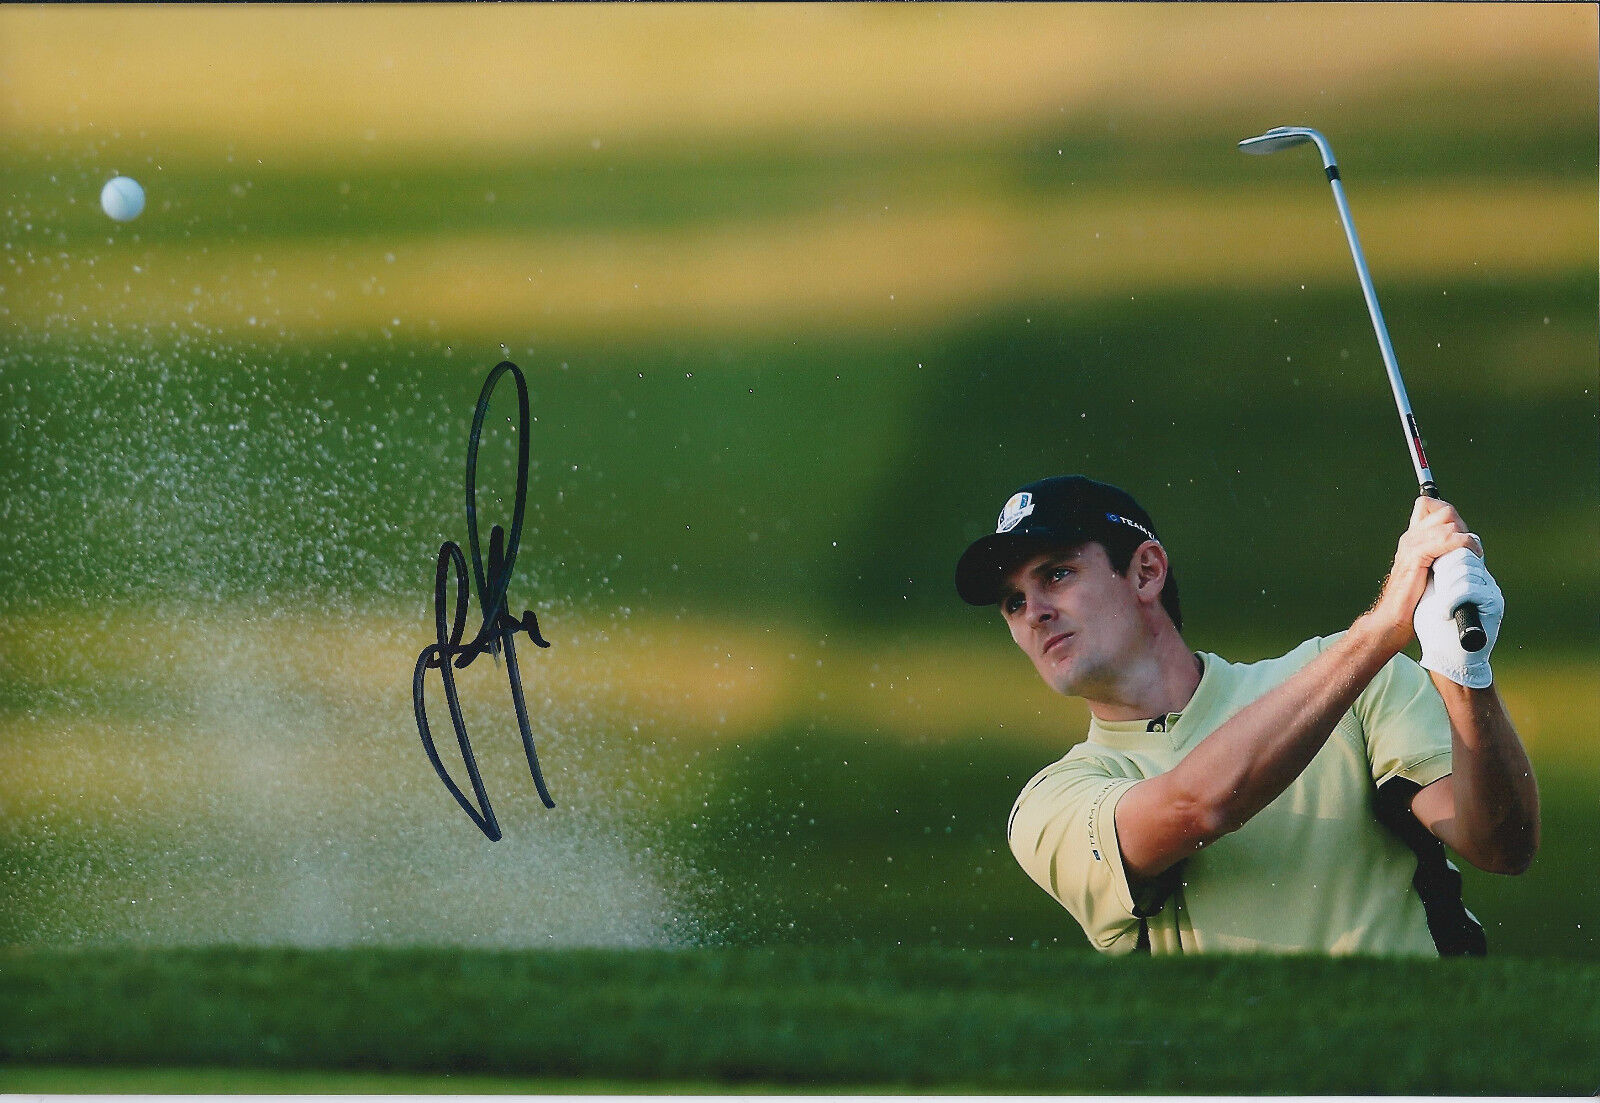 Justin ROSE SIGNED Photo Poster painting AFTAL Autograph COA Golf Ryder Cup Europe MEDINAH 2012